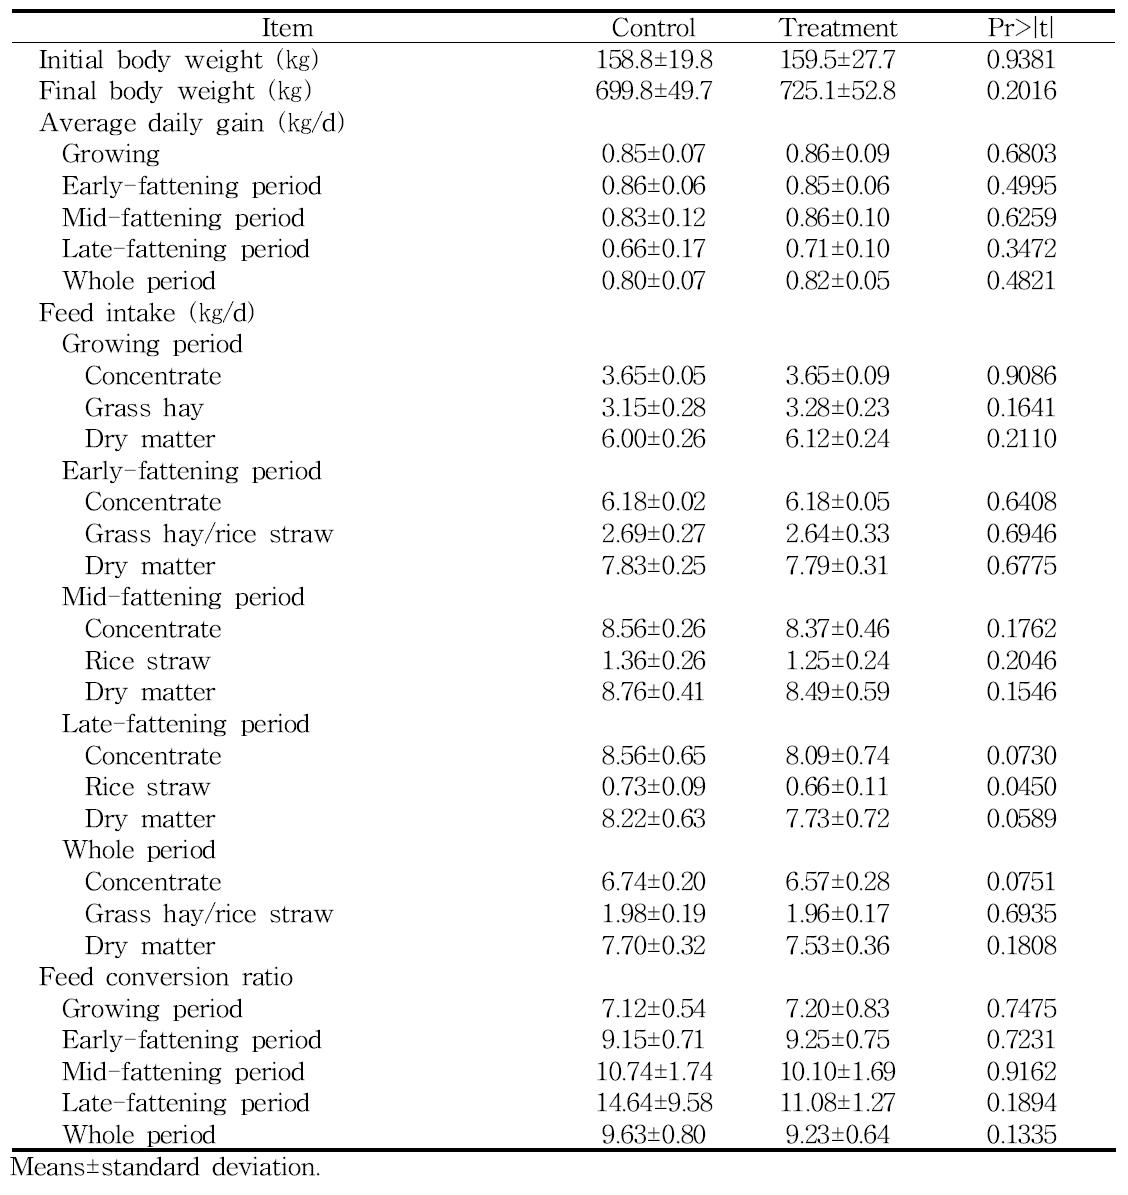 Effects of dietary multi-nutritional targeted supplementation at different growth stages on growth performance of Hanwoo steers